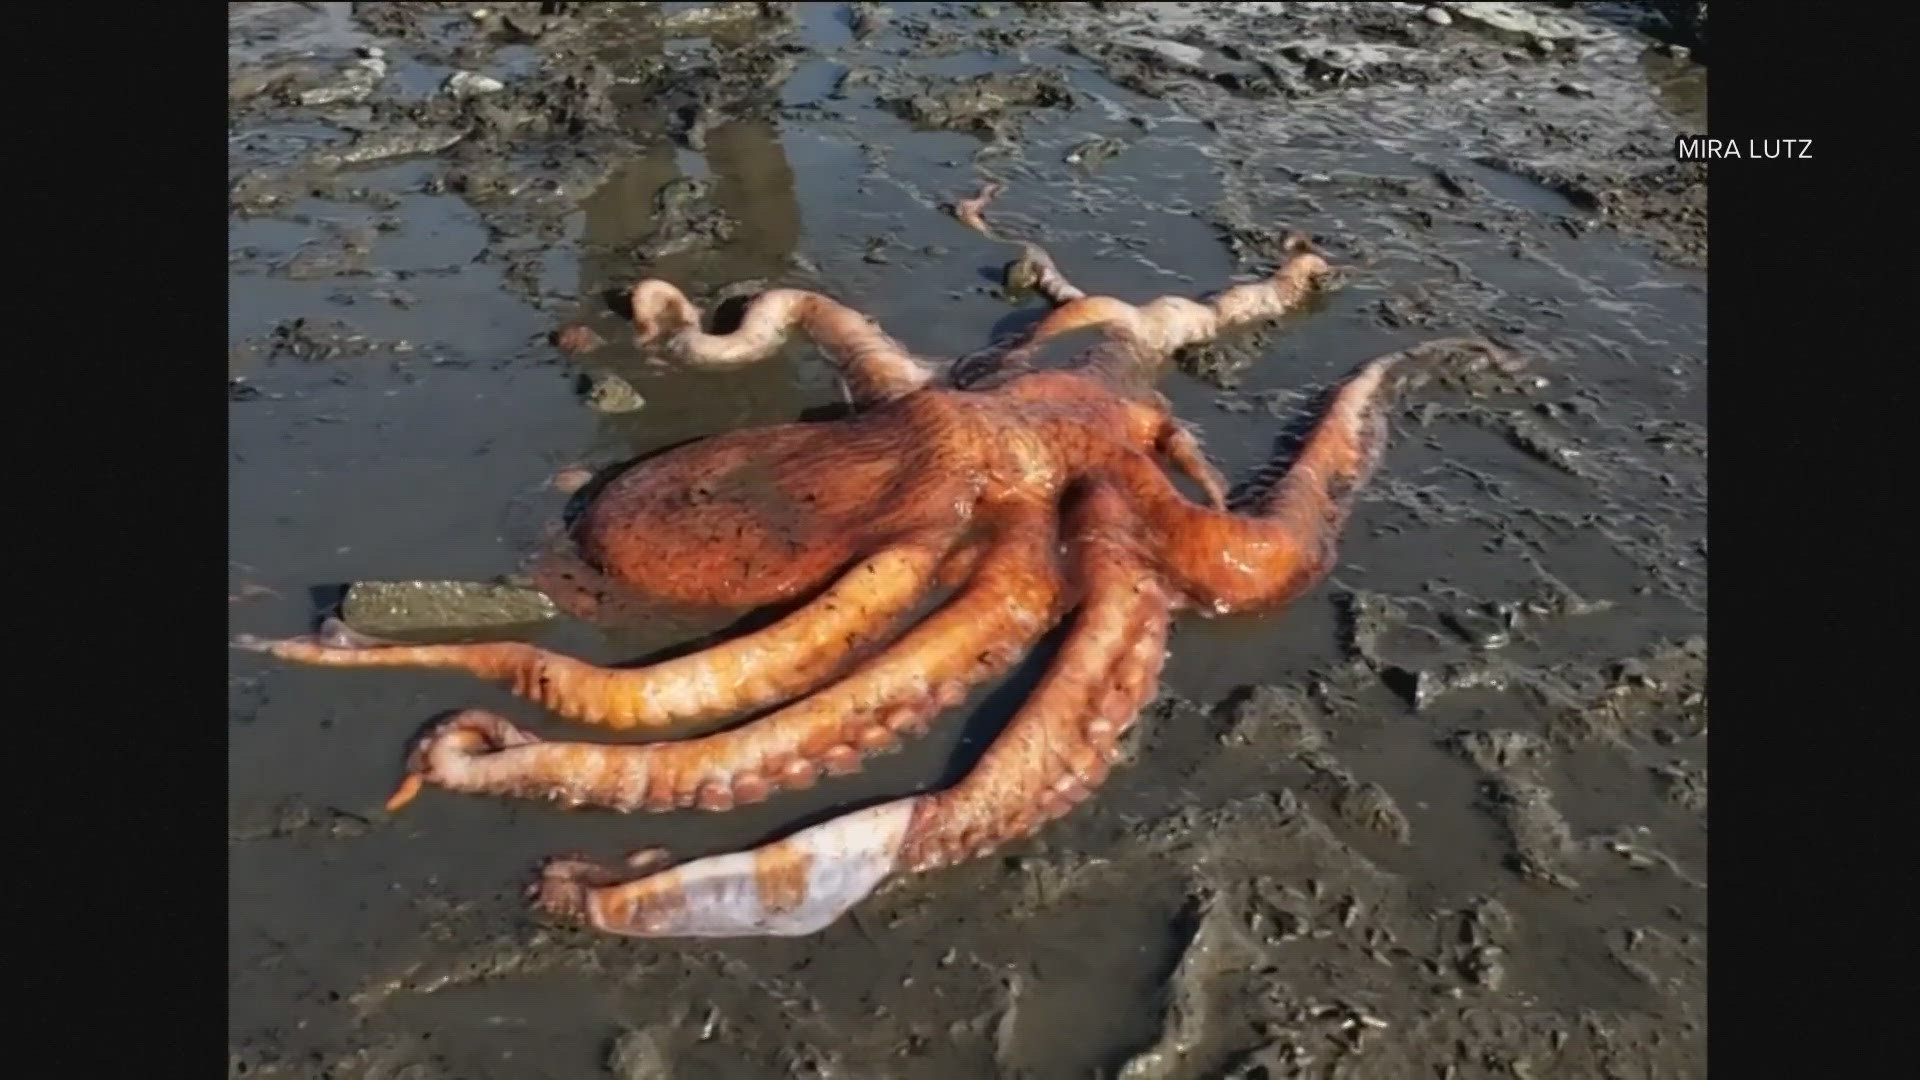 A little girl kept the octopus alive by pouring water on it with her sand bucket until officials arrived at Bay View State Park.